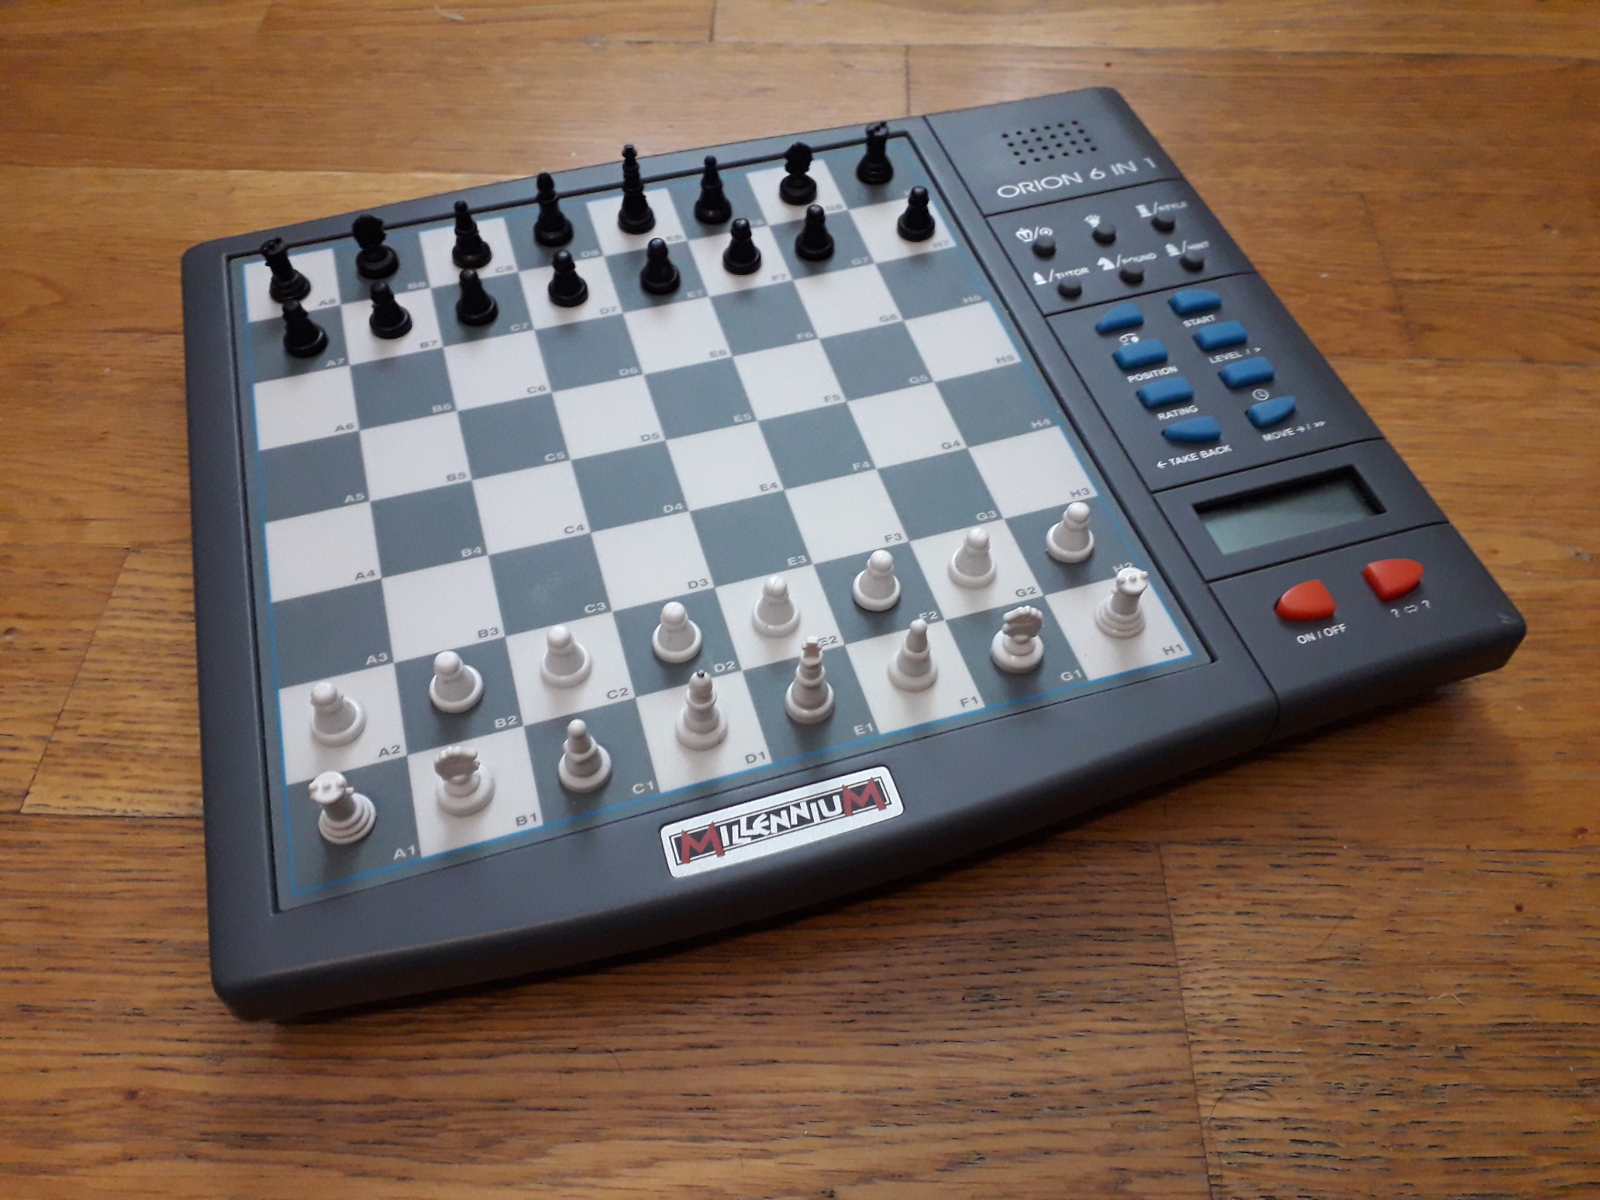 My Chess Computers